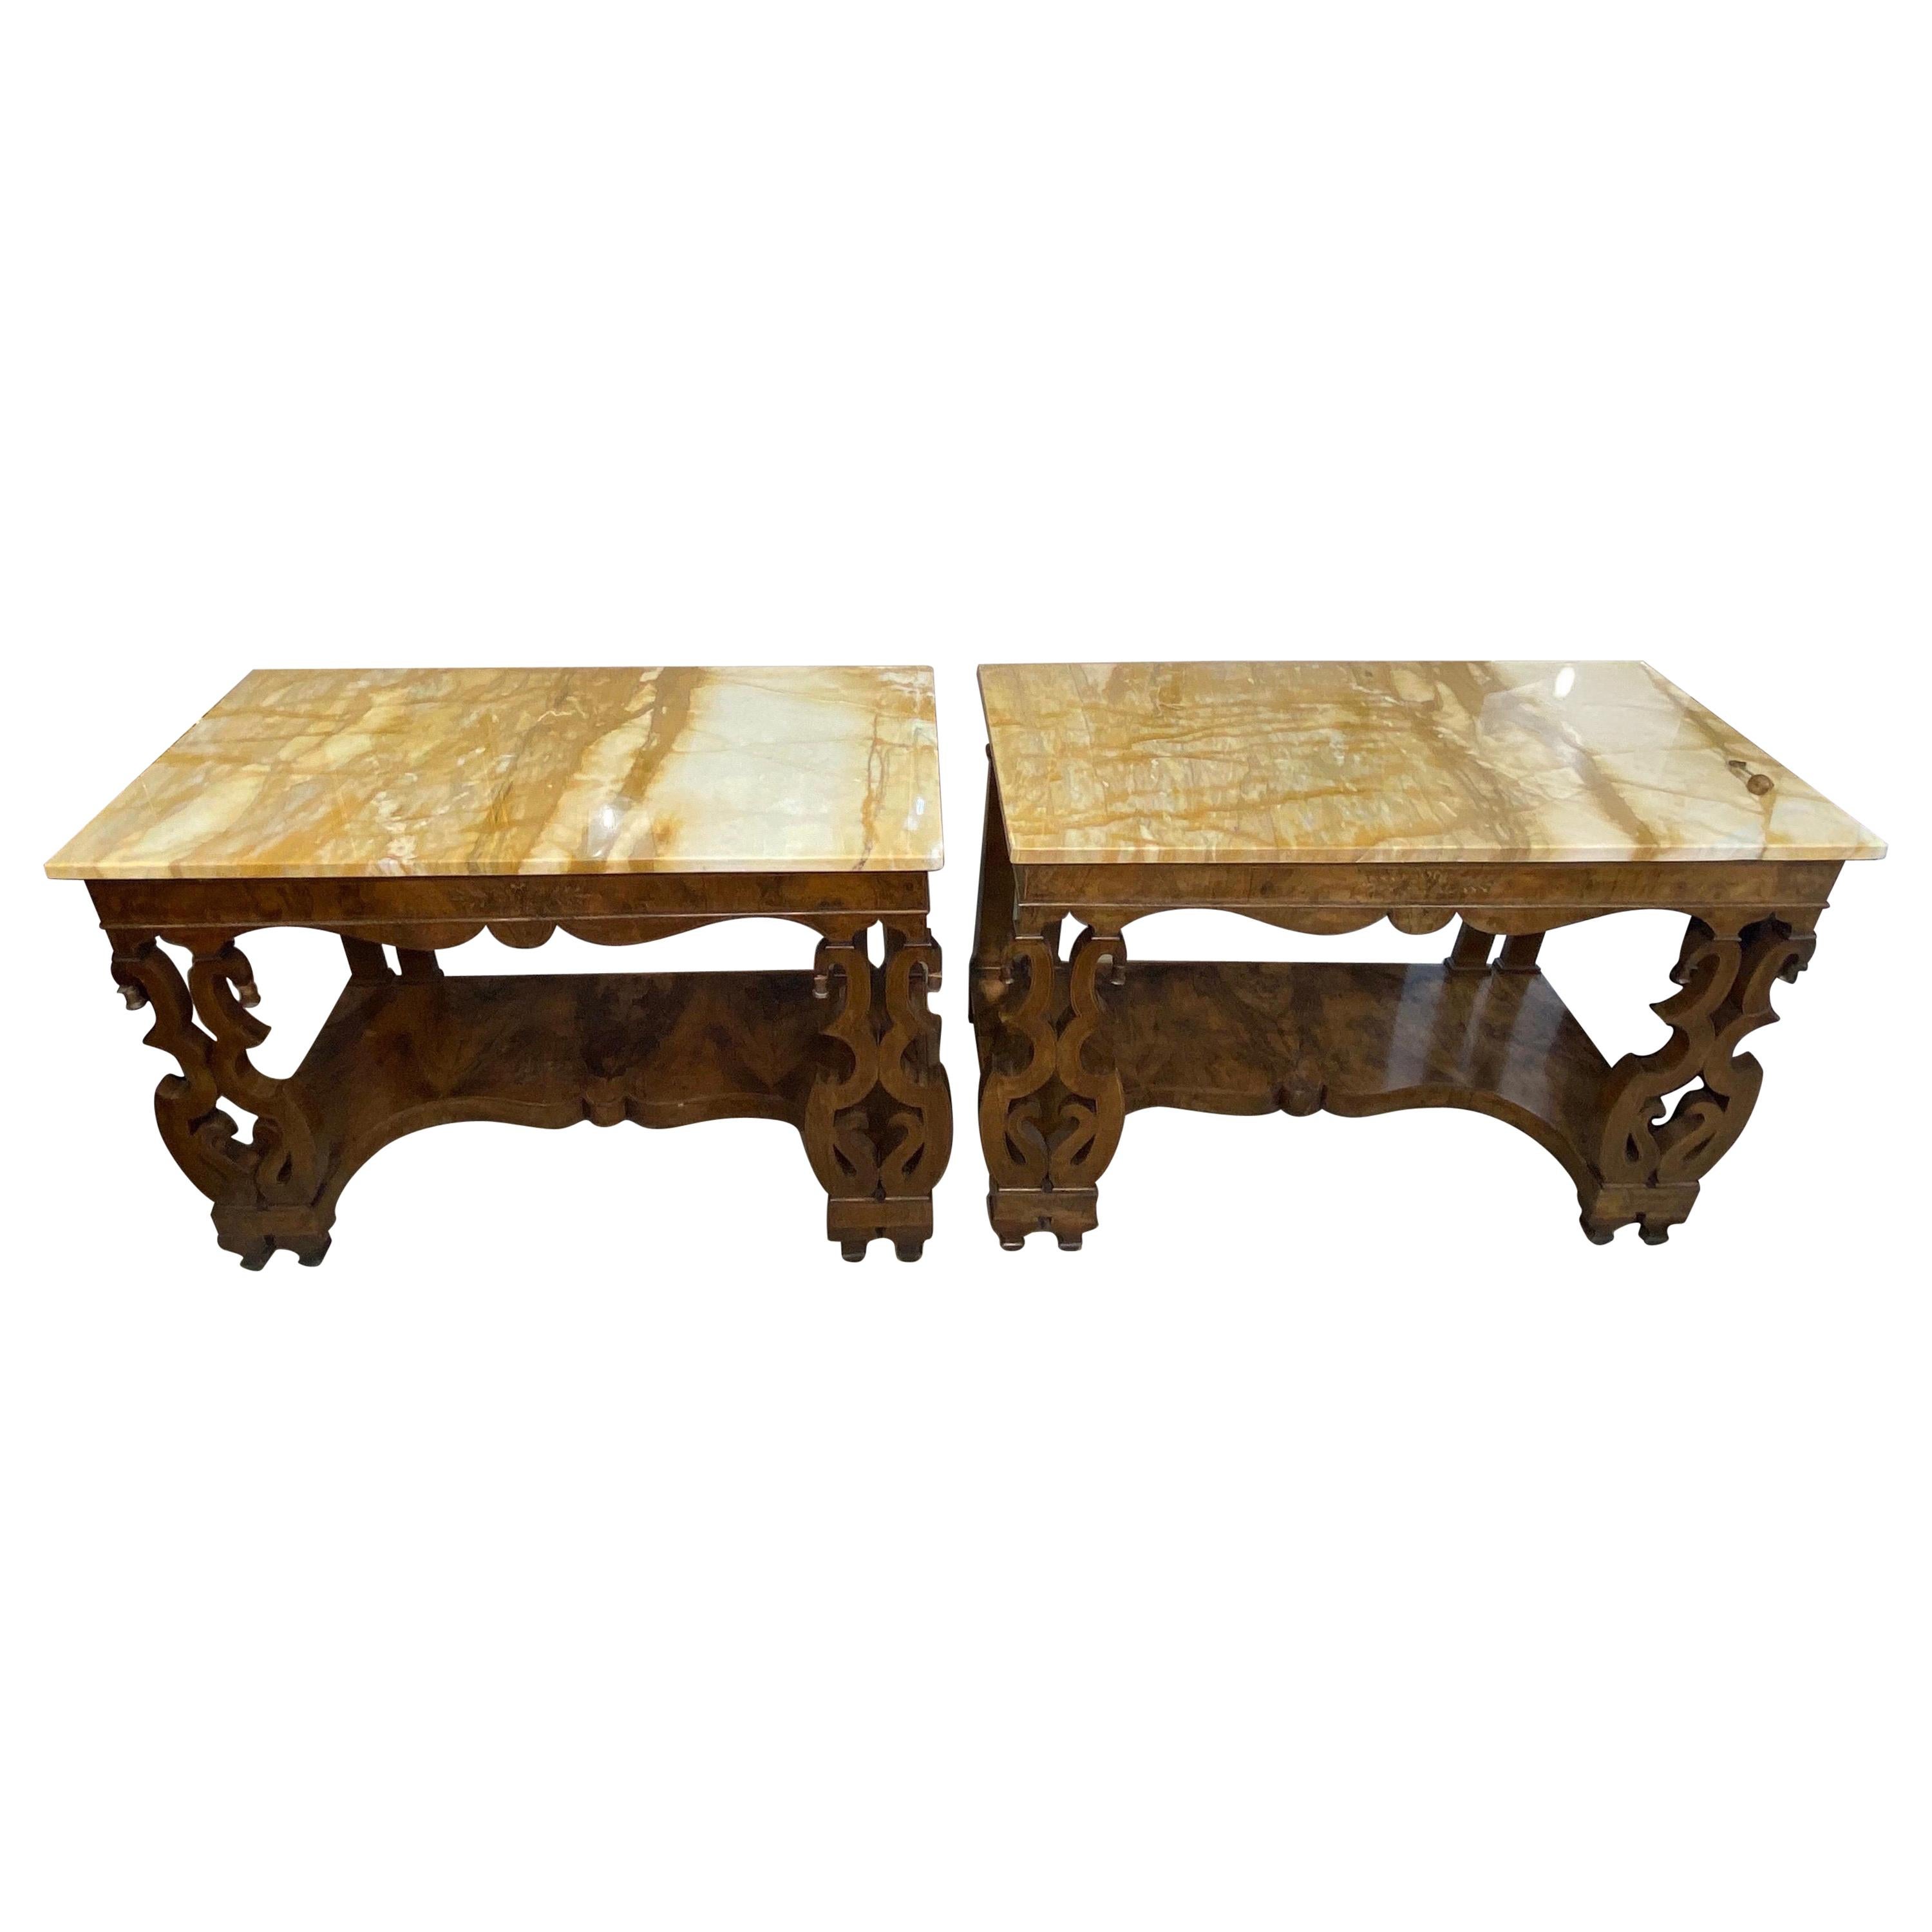 Pair of 19th Century Continental Inlaid Walnut Consoles with Yellow Onyx Tops For Sale